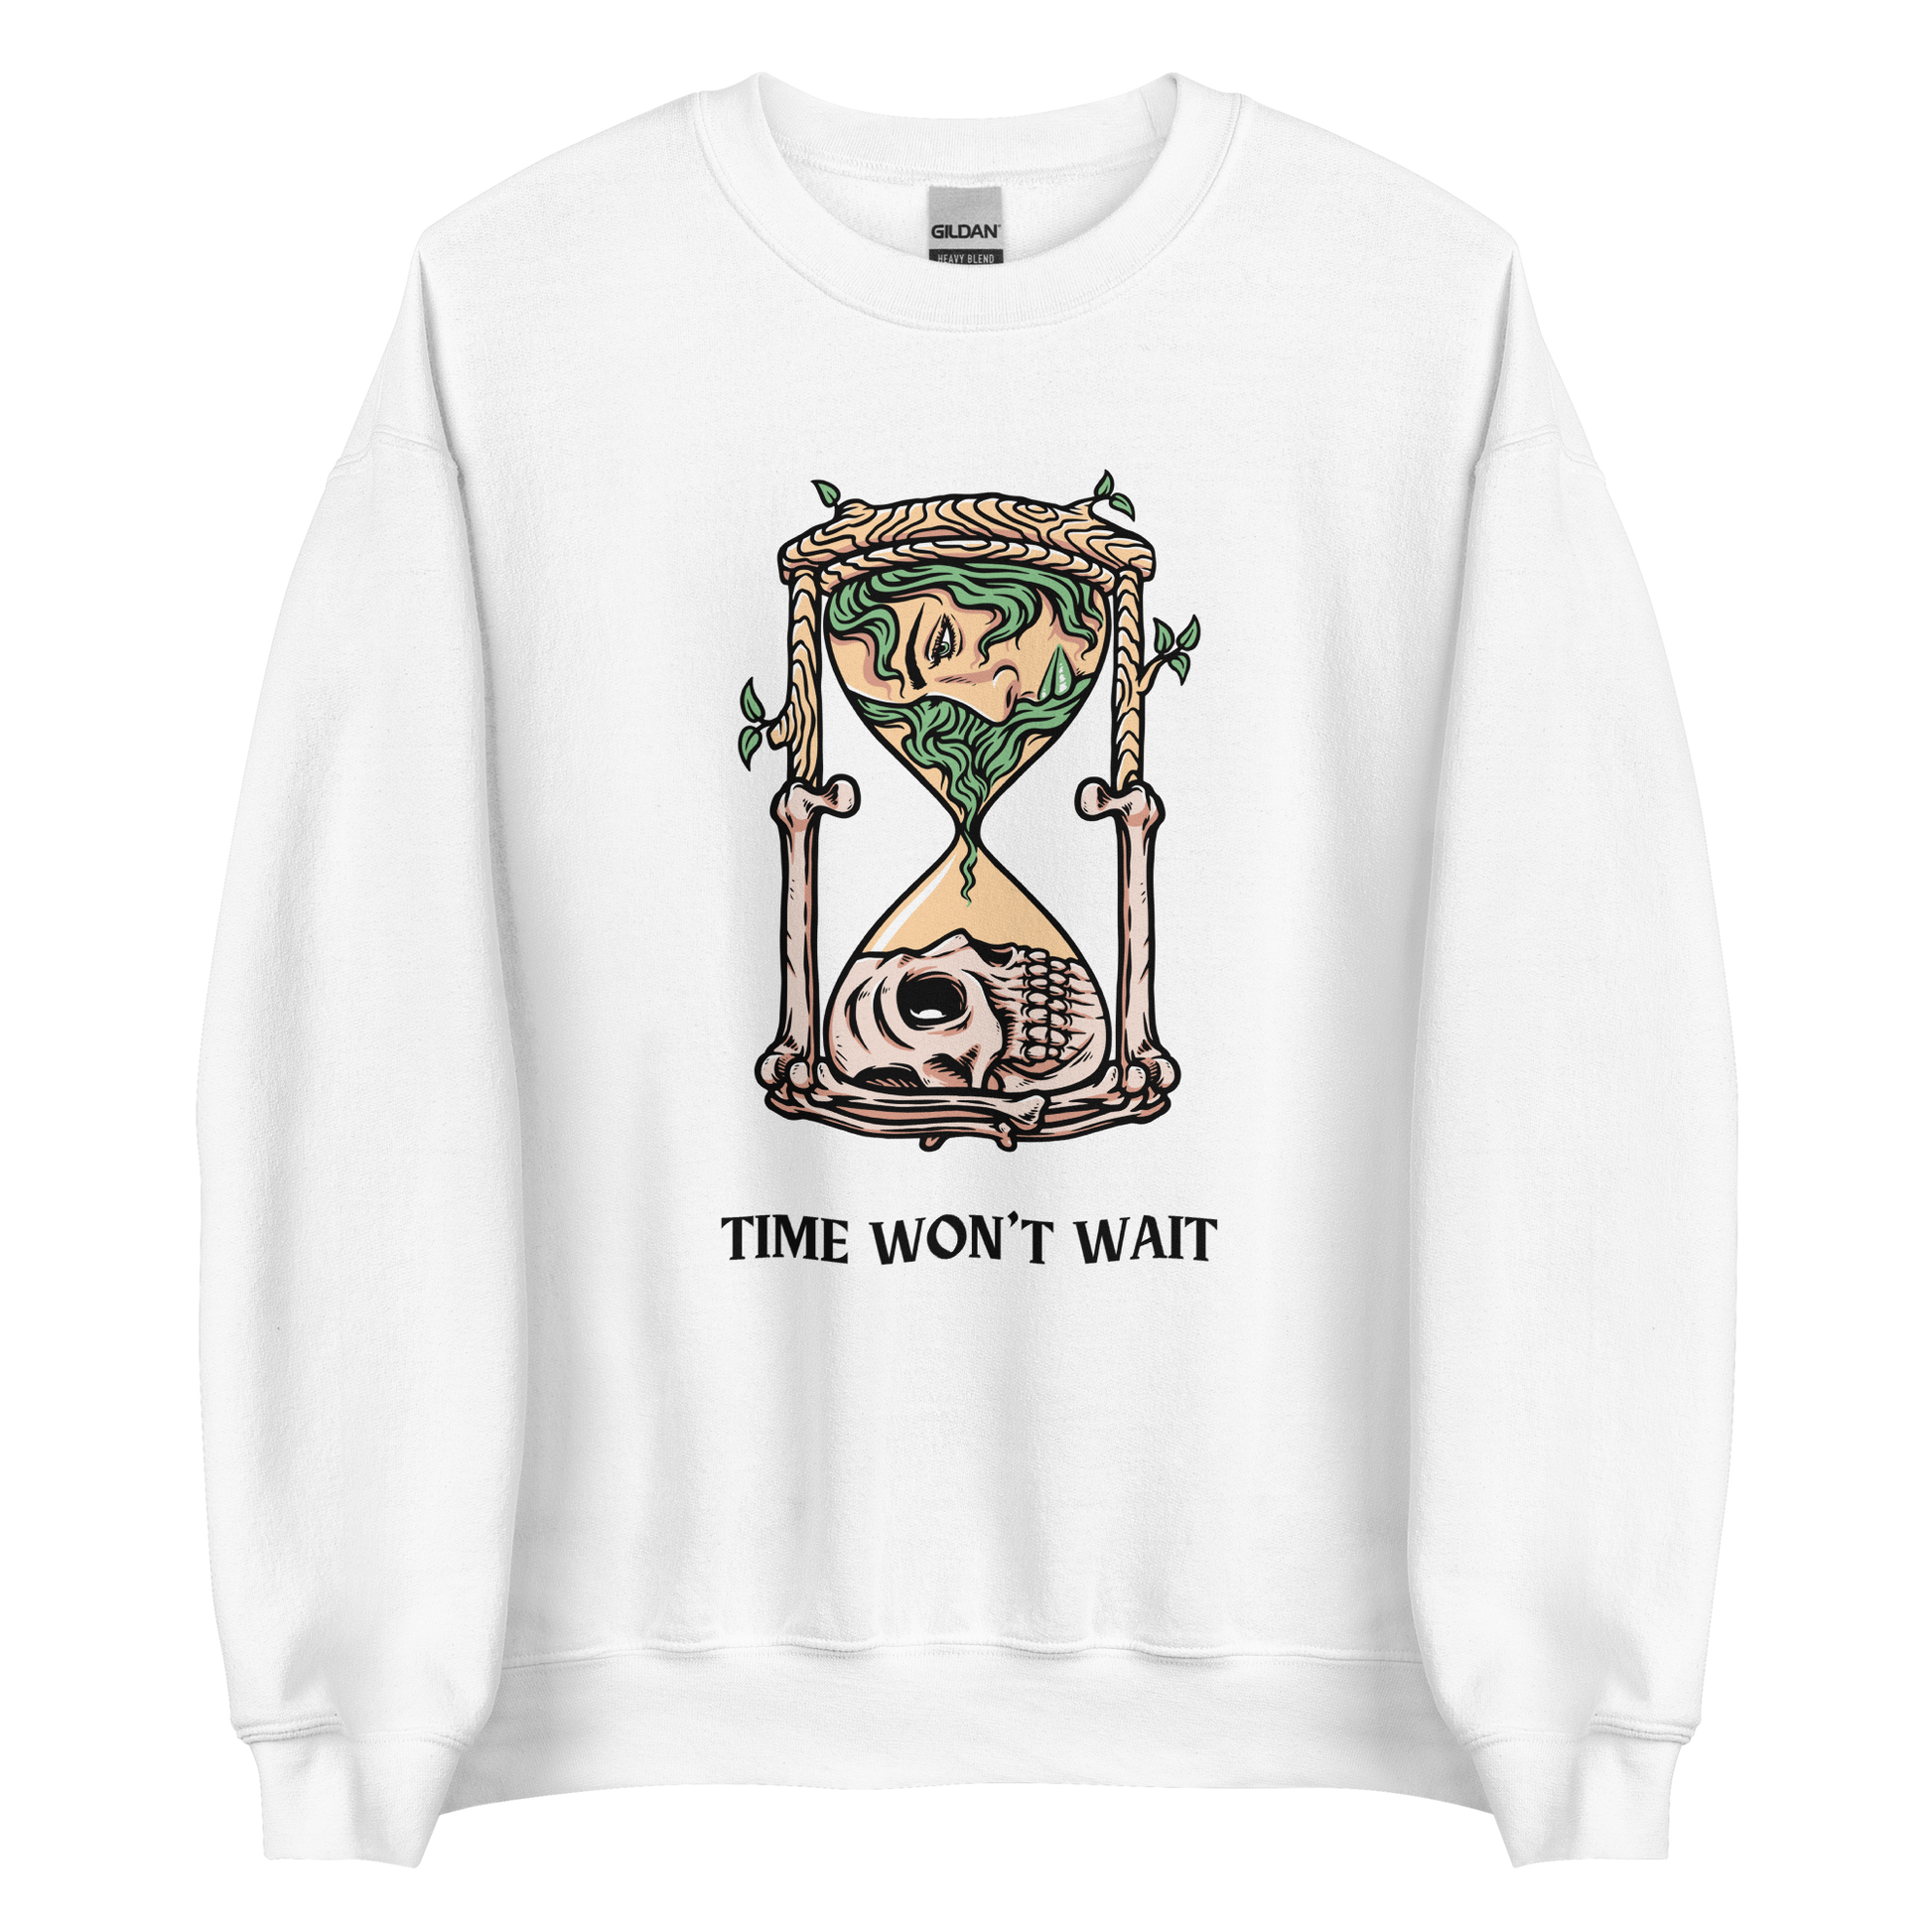 White Hourglass Sweatshirt featuring a captivating Time Won't Wait graphic on the chest - Cool Graphic Hourglass Sweatshirts - Boozy Fox